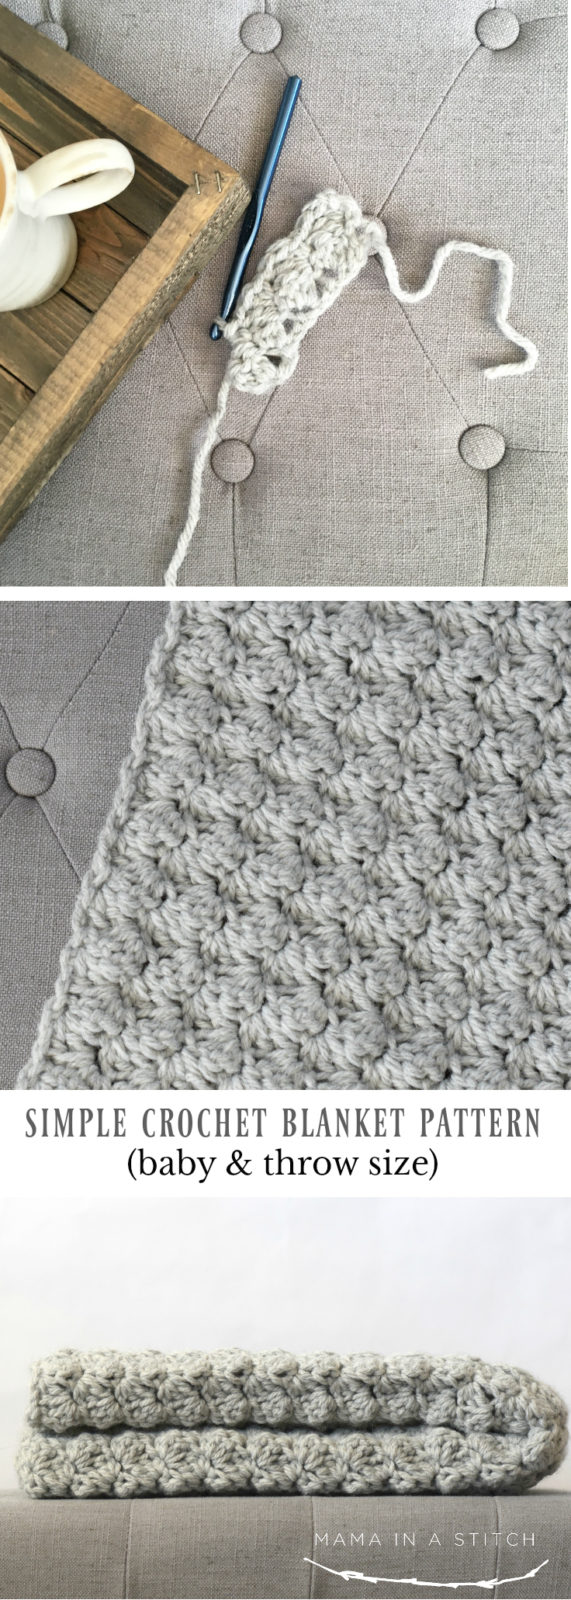 Simple Crocheted Blanket Go To Pattern Mama In A Stitch,Thermofoil Cabinets Vs Wood